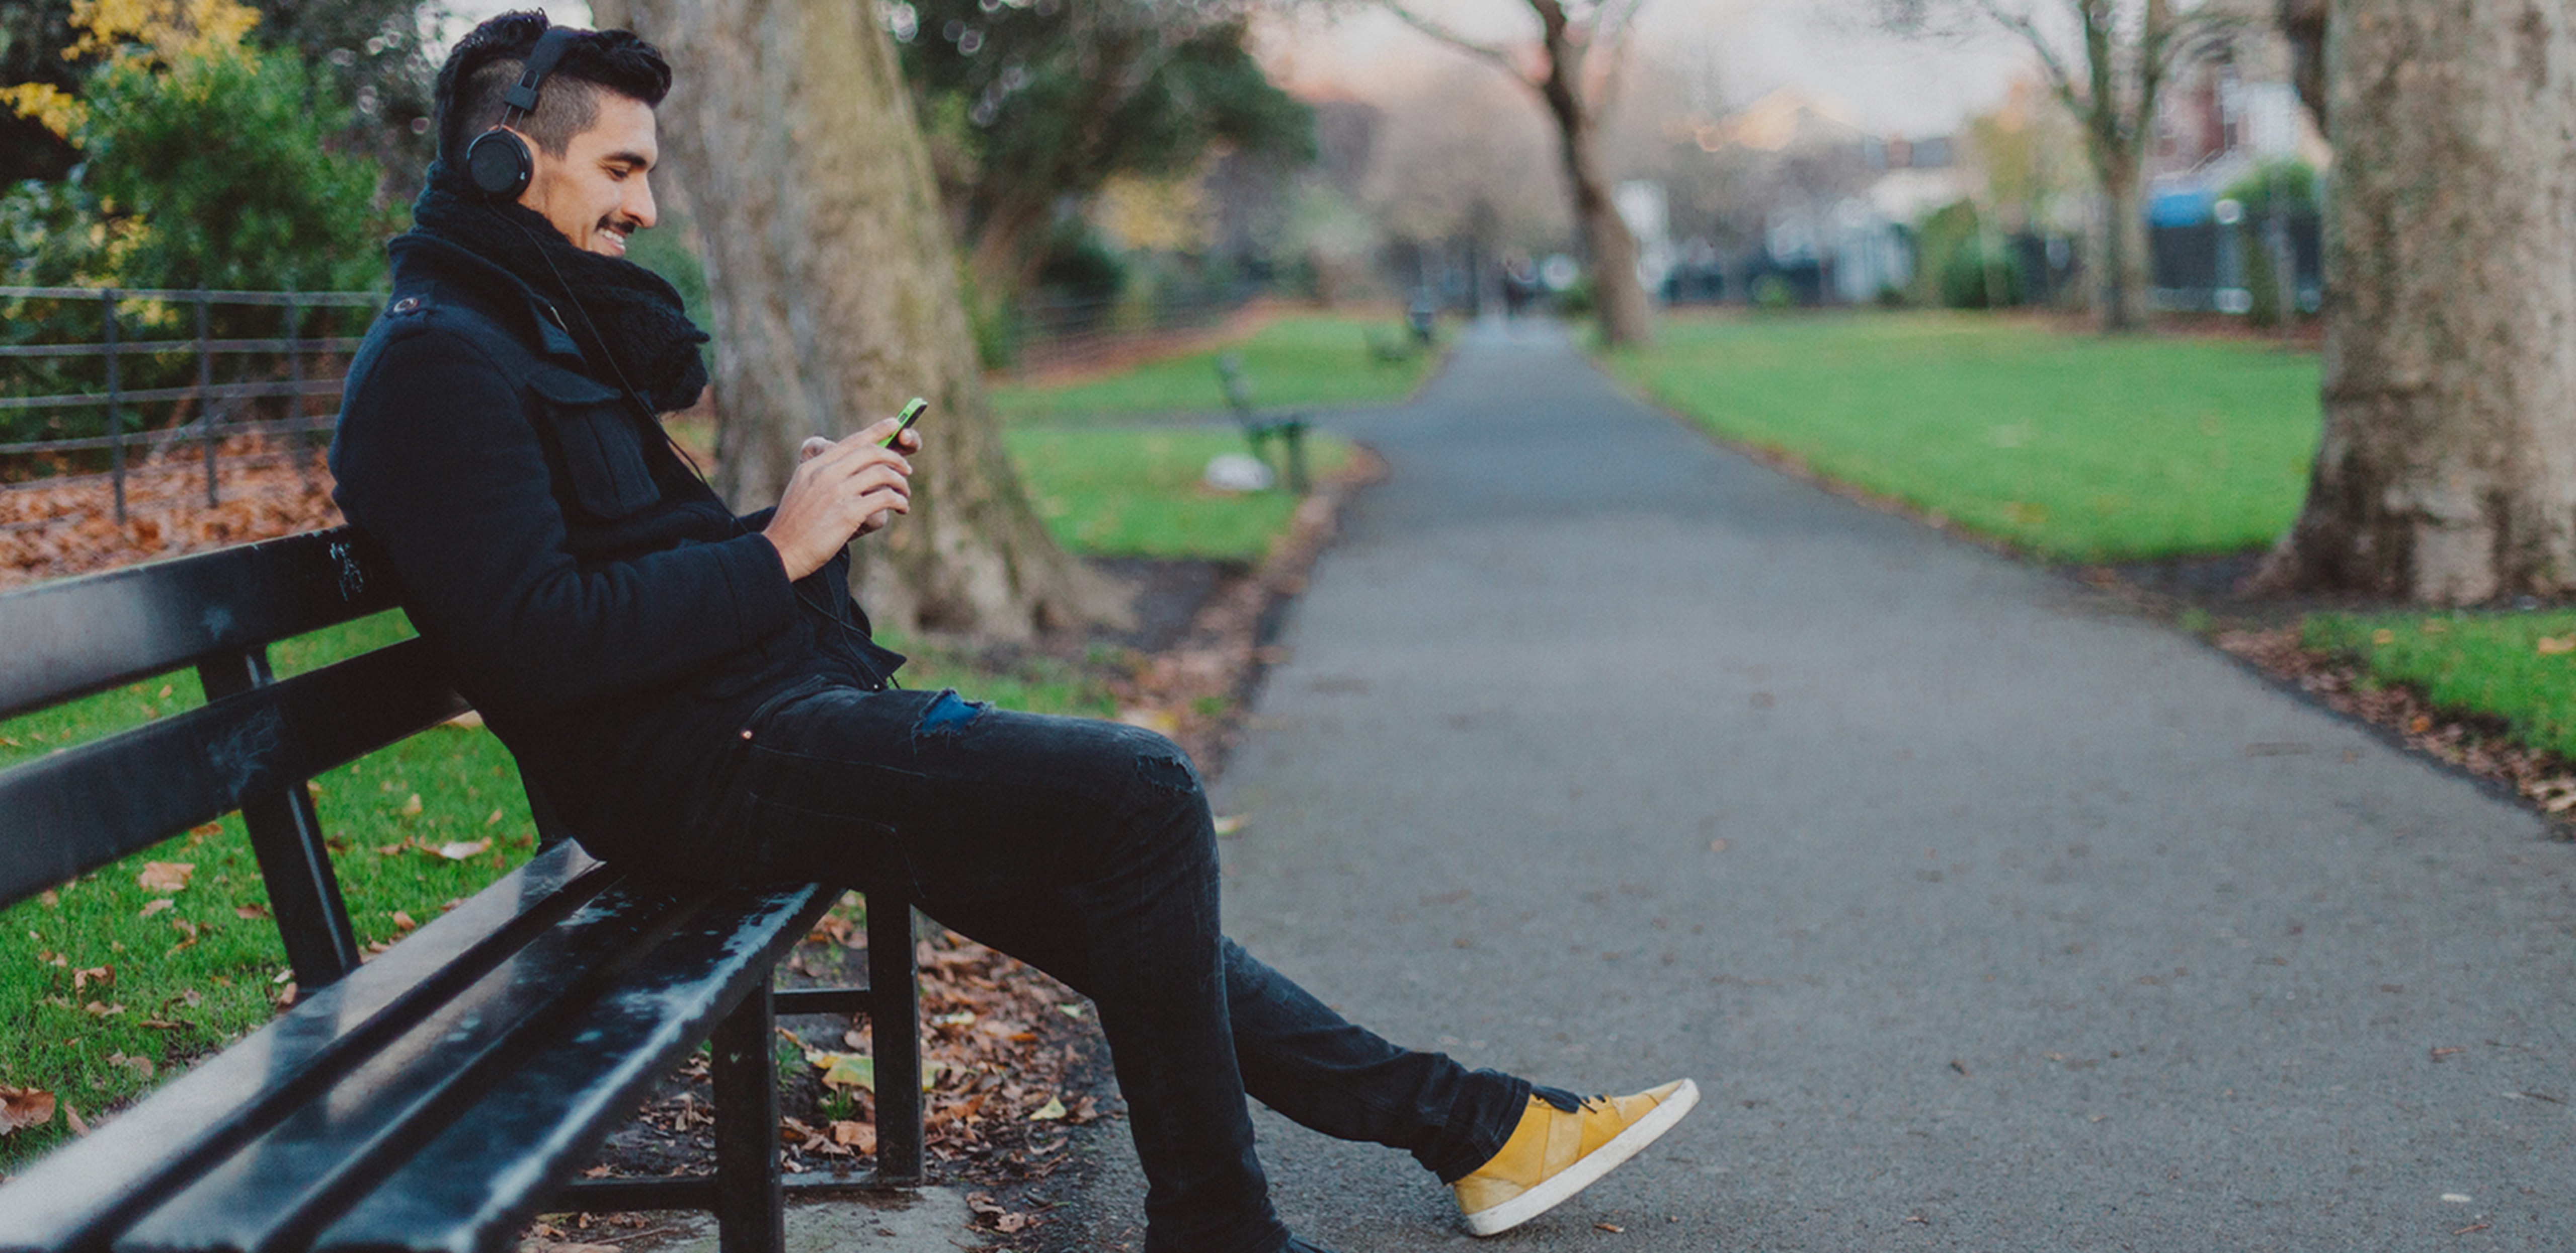 Man sitting on park bench, looking at a phone